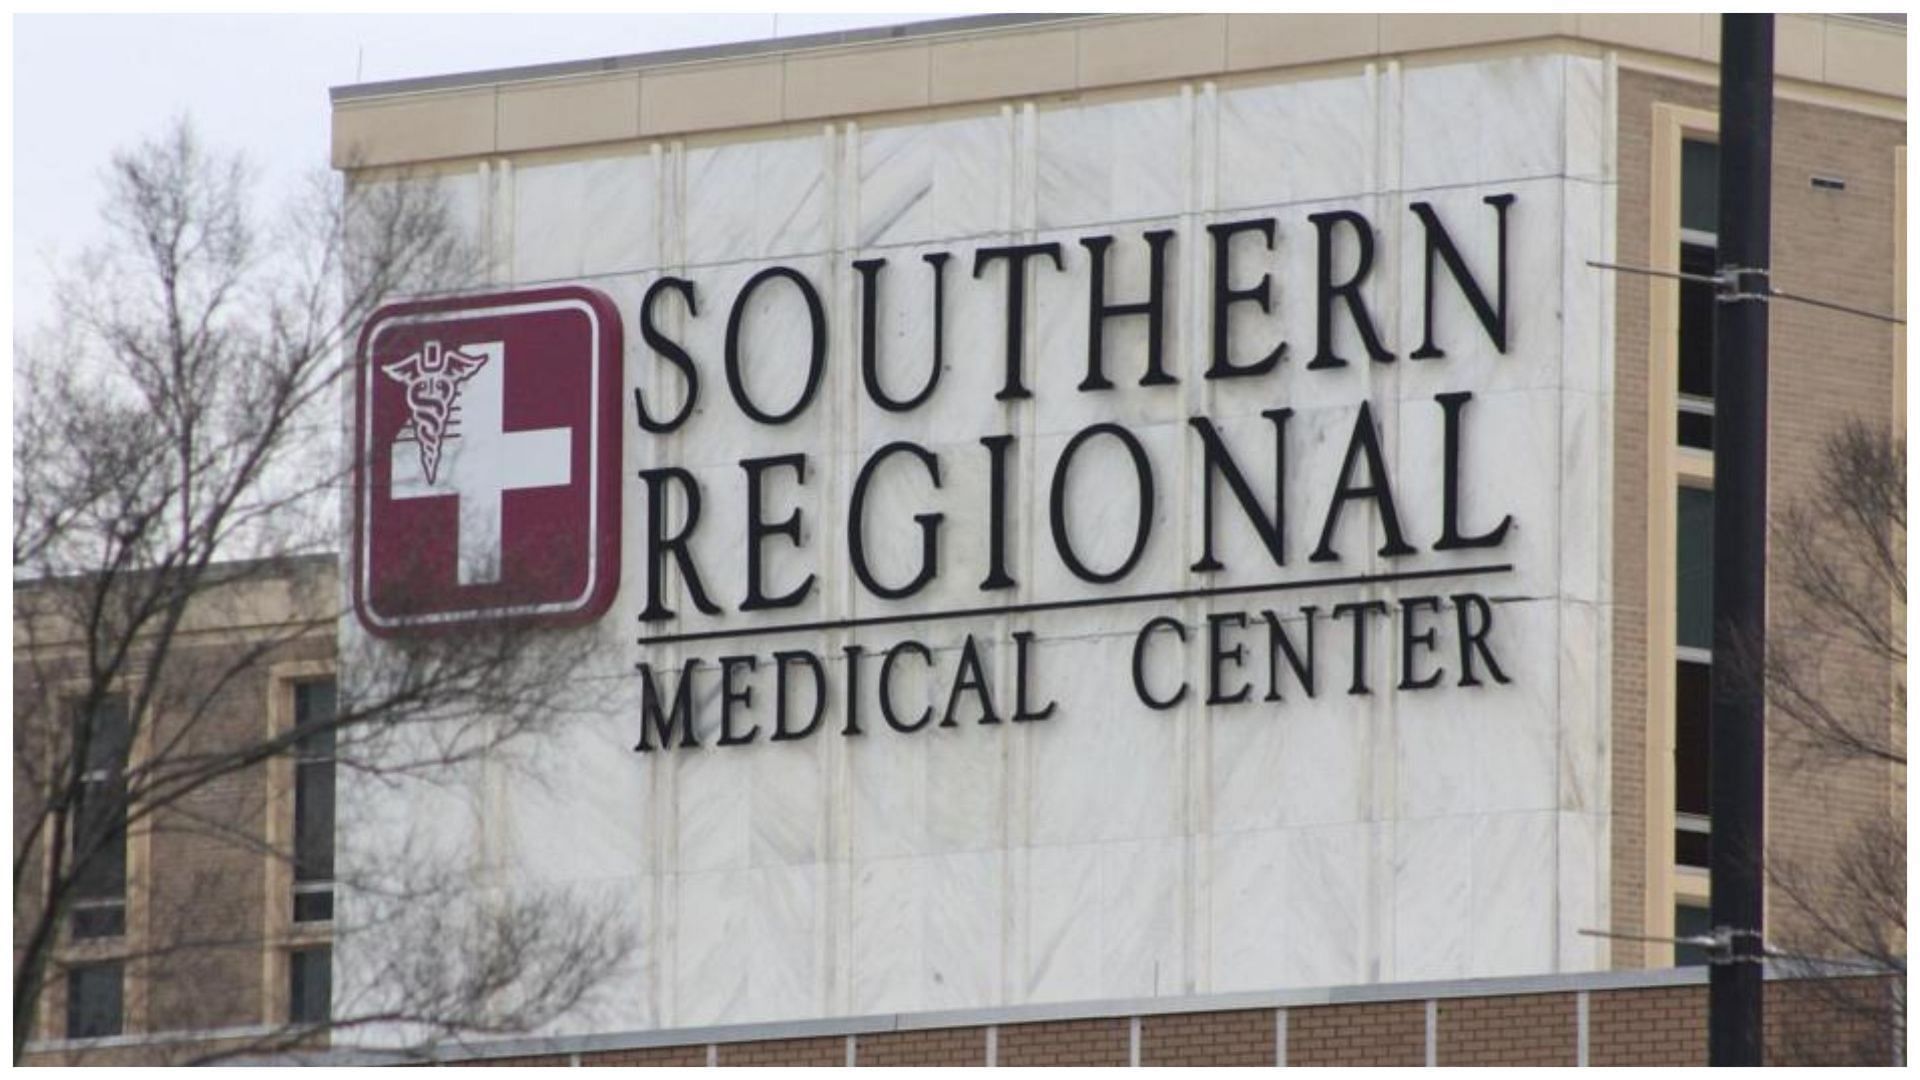 The Southern Regional Medical Center is currently being sued (Image via Southern Regional)